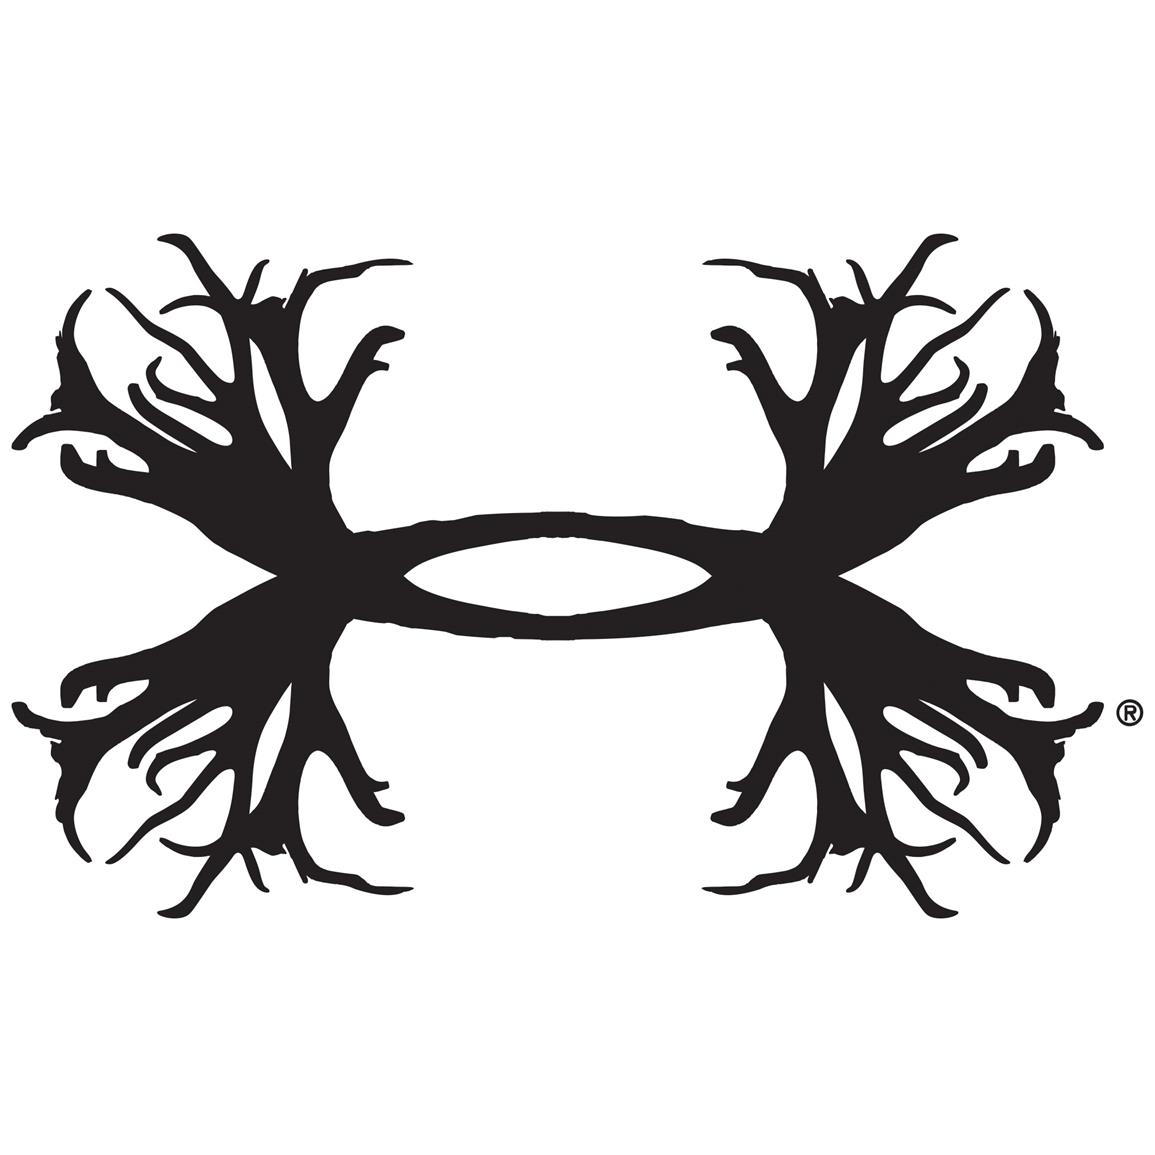 under armour fishing decal